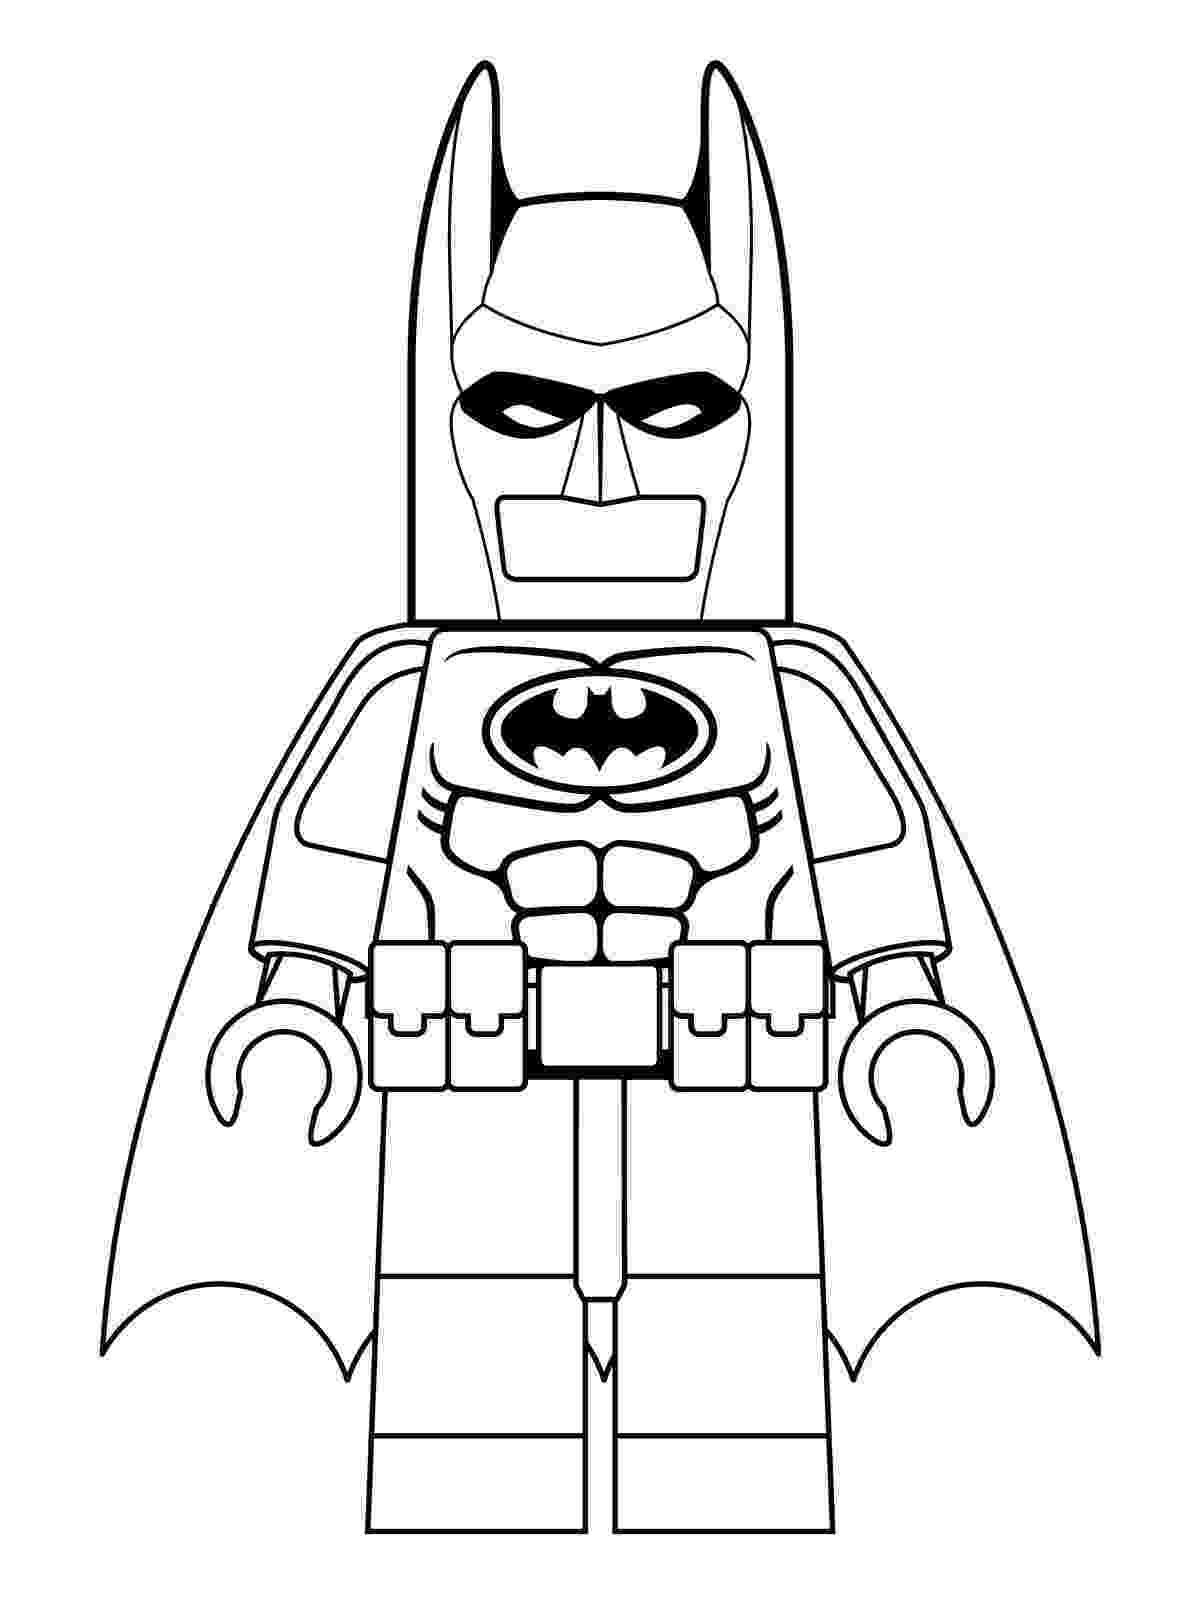 batman coloring pages free printable lego batman coloring pages best coloring pages for kids free printable batman pages coloring 